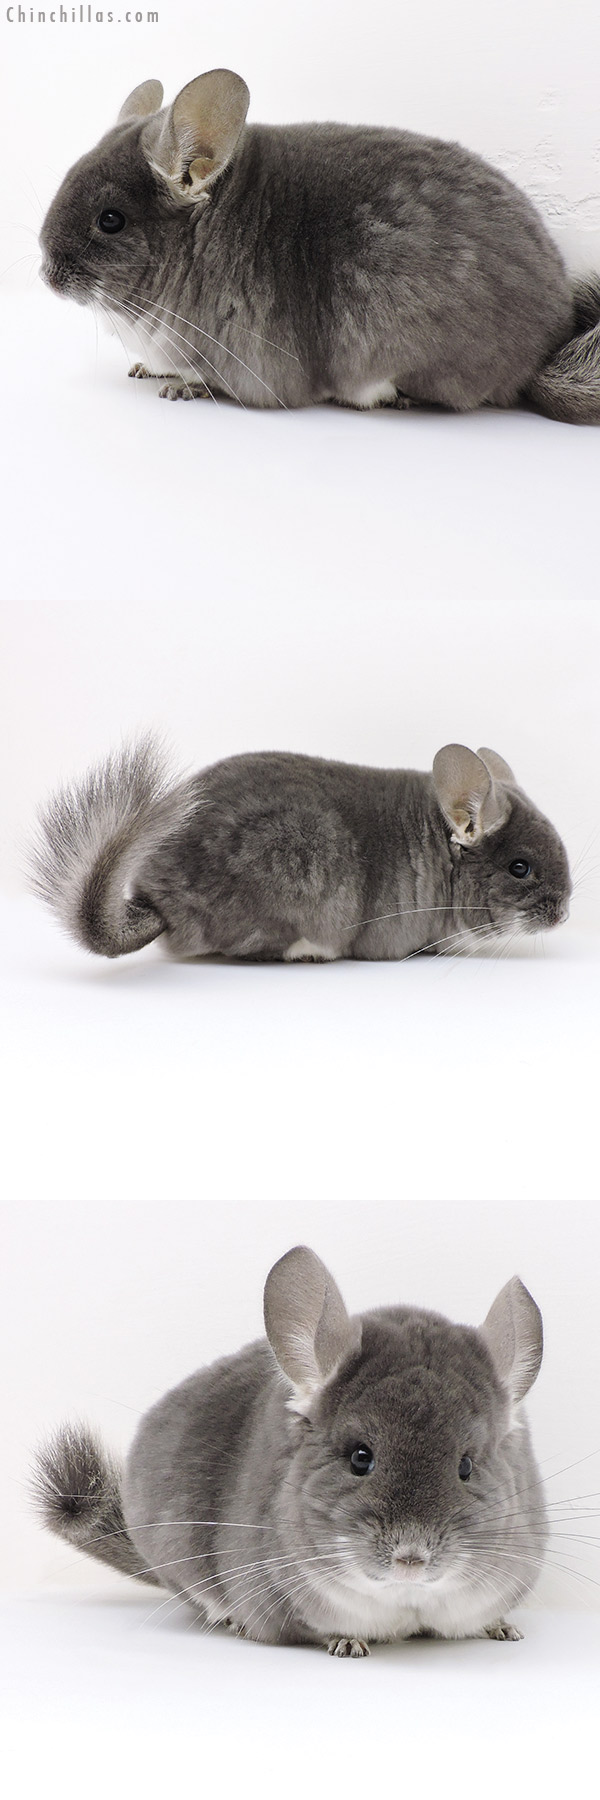 Chinchilla or related item offered for sale or export on Chinchillas.com - 17119 Large Show Quality TOV Violet Female Chinchilla